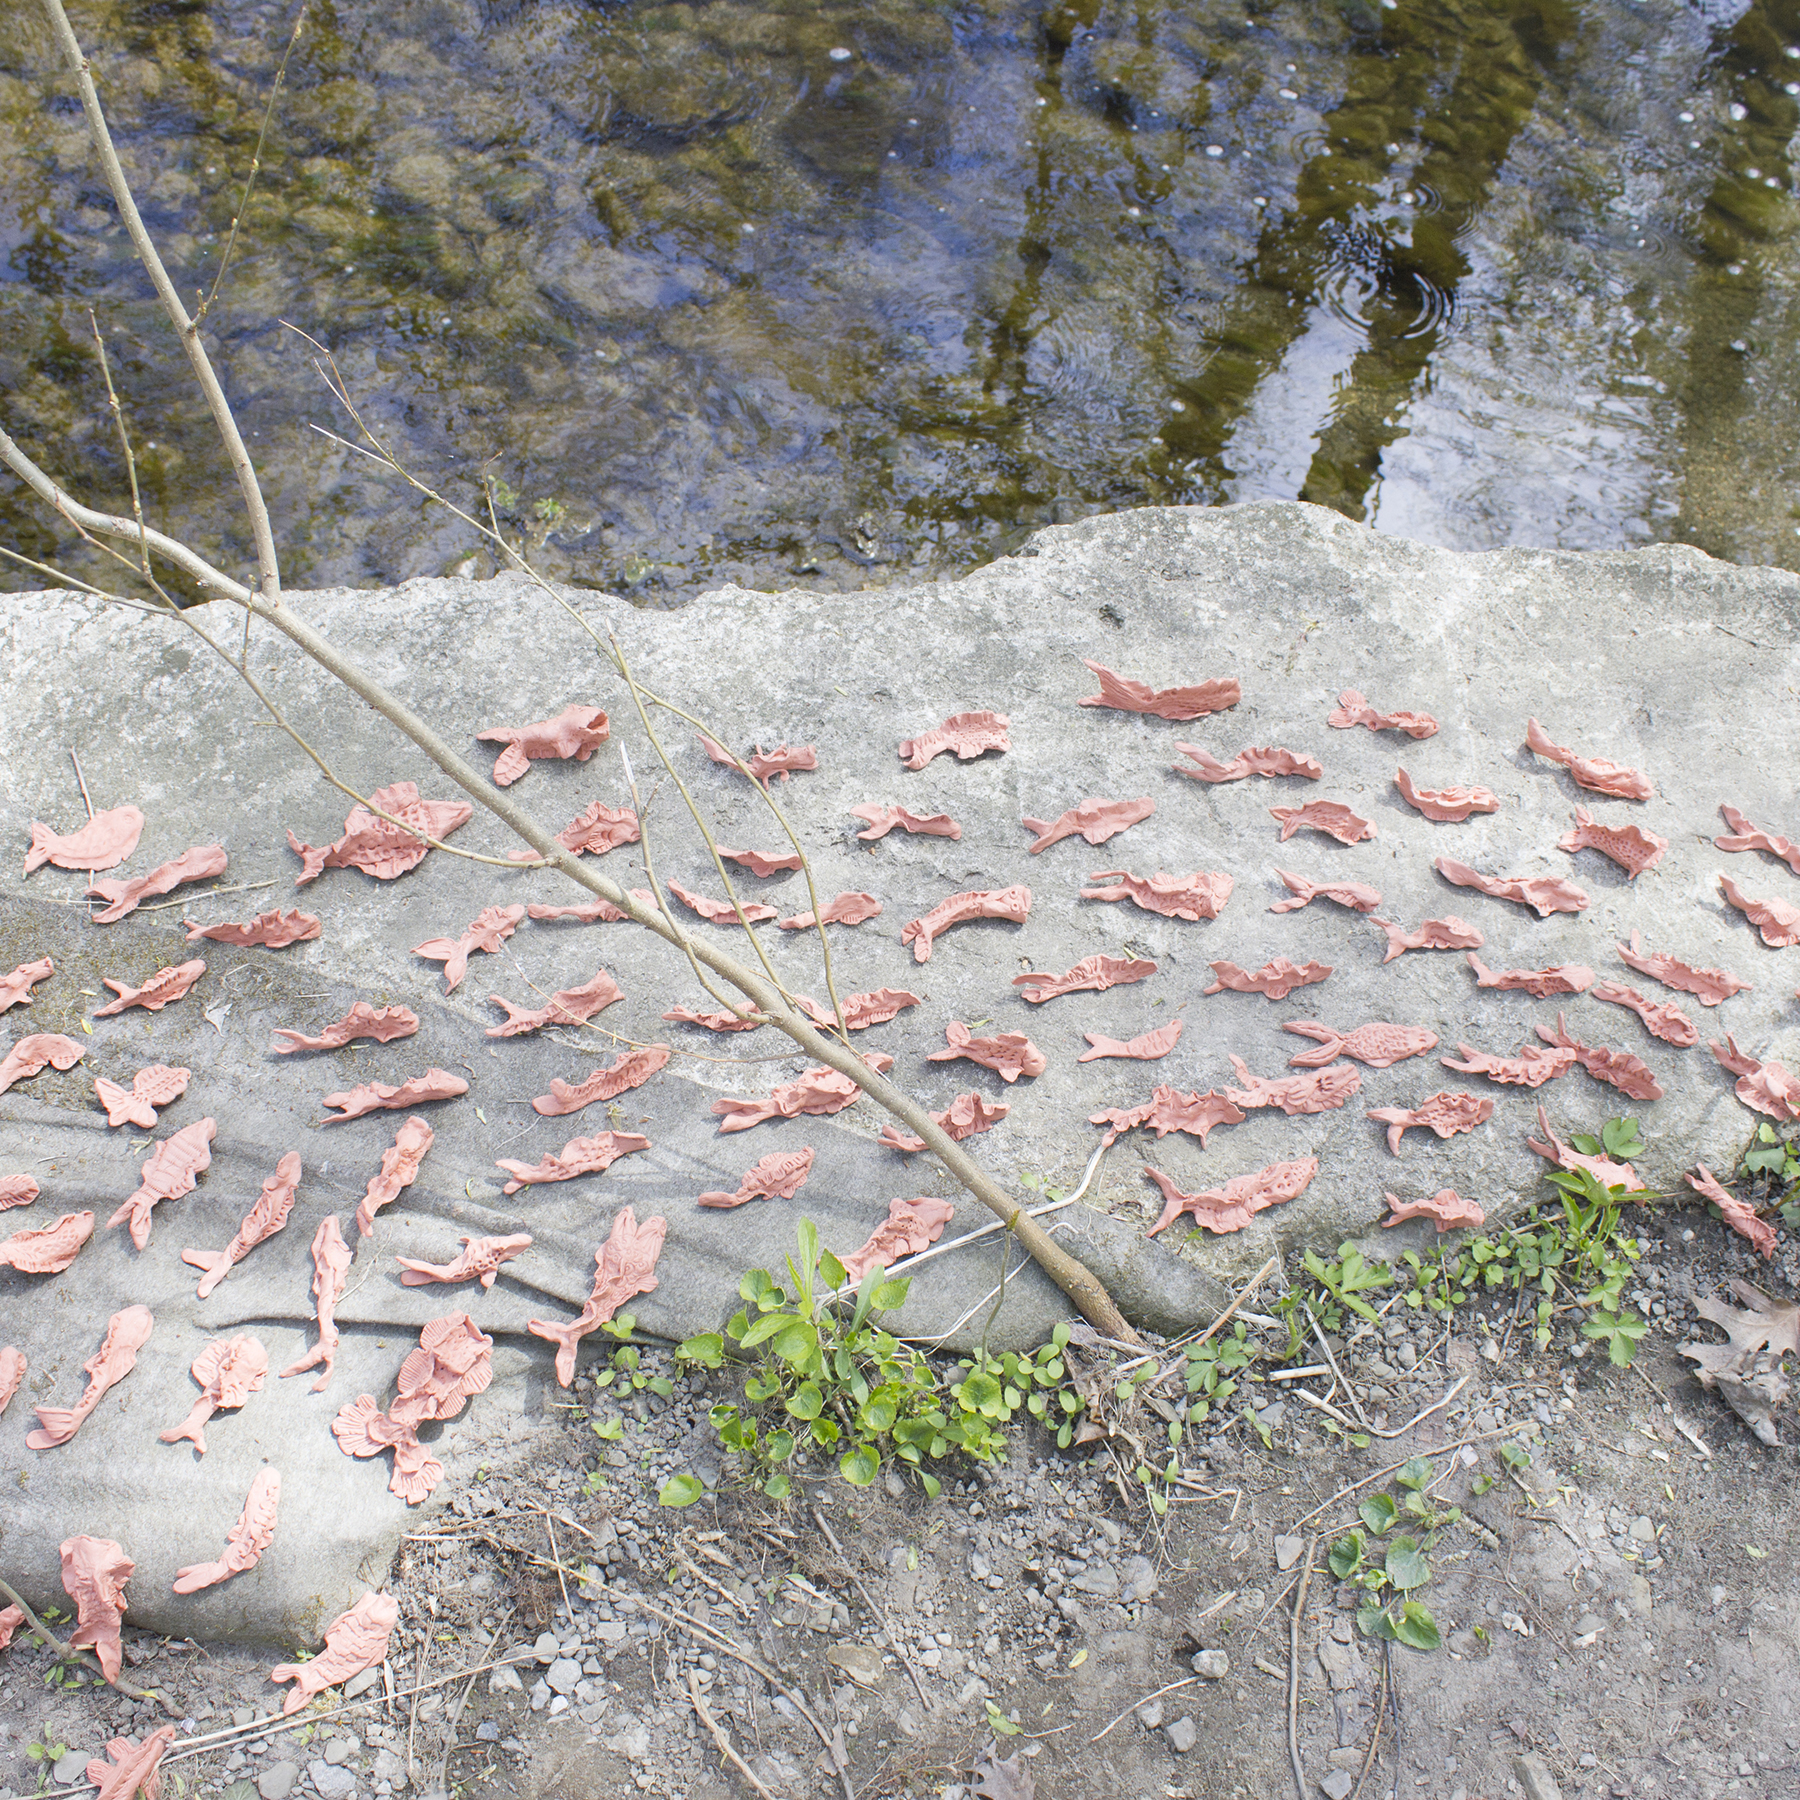 A photograph of many small hand-sculpted red clay fish laid out on a rocky river bank.